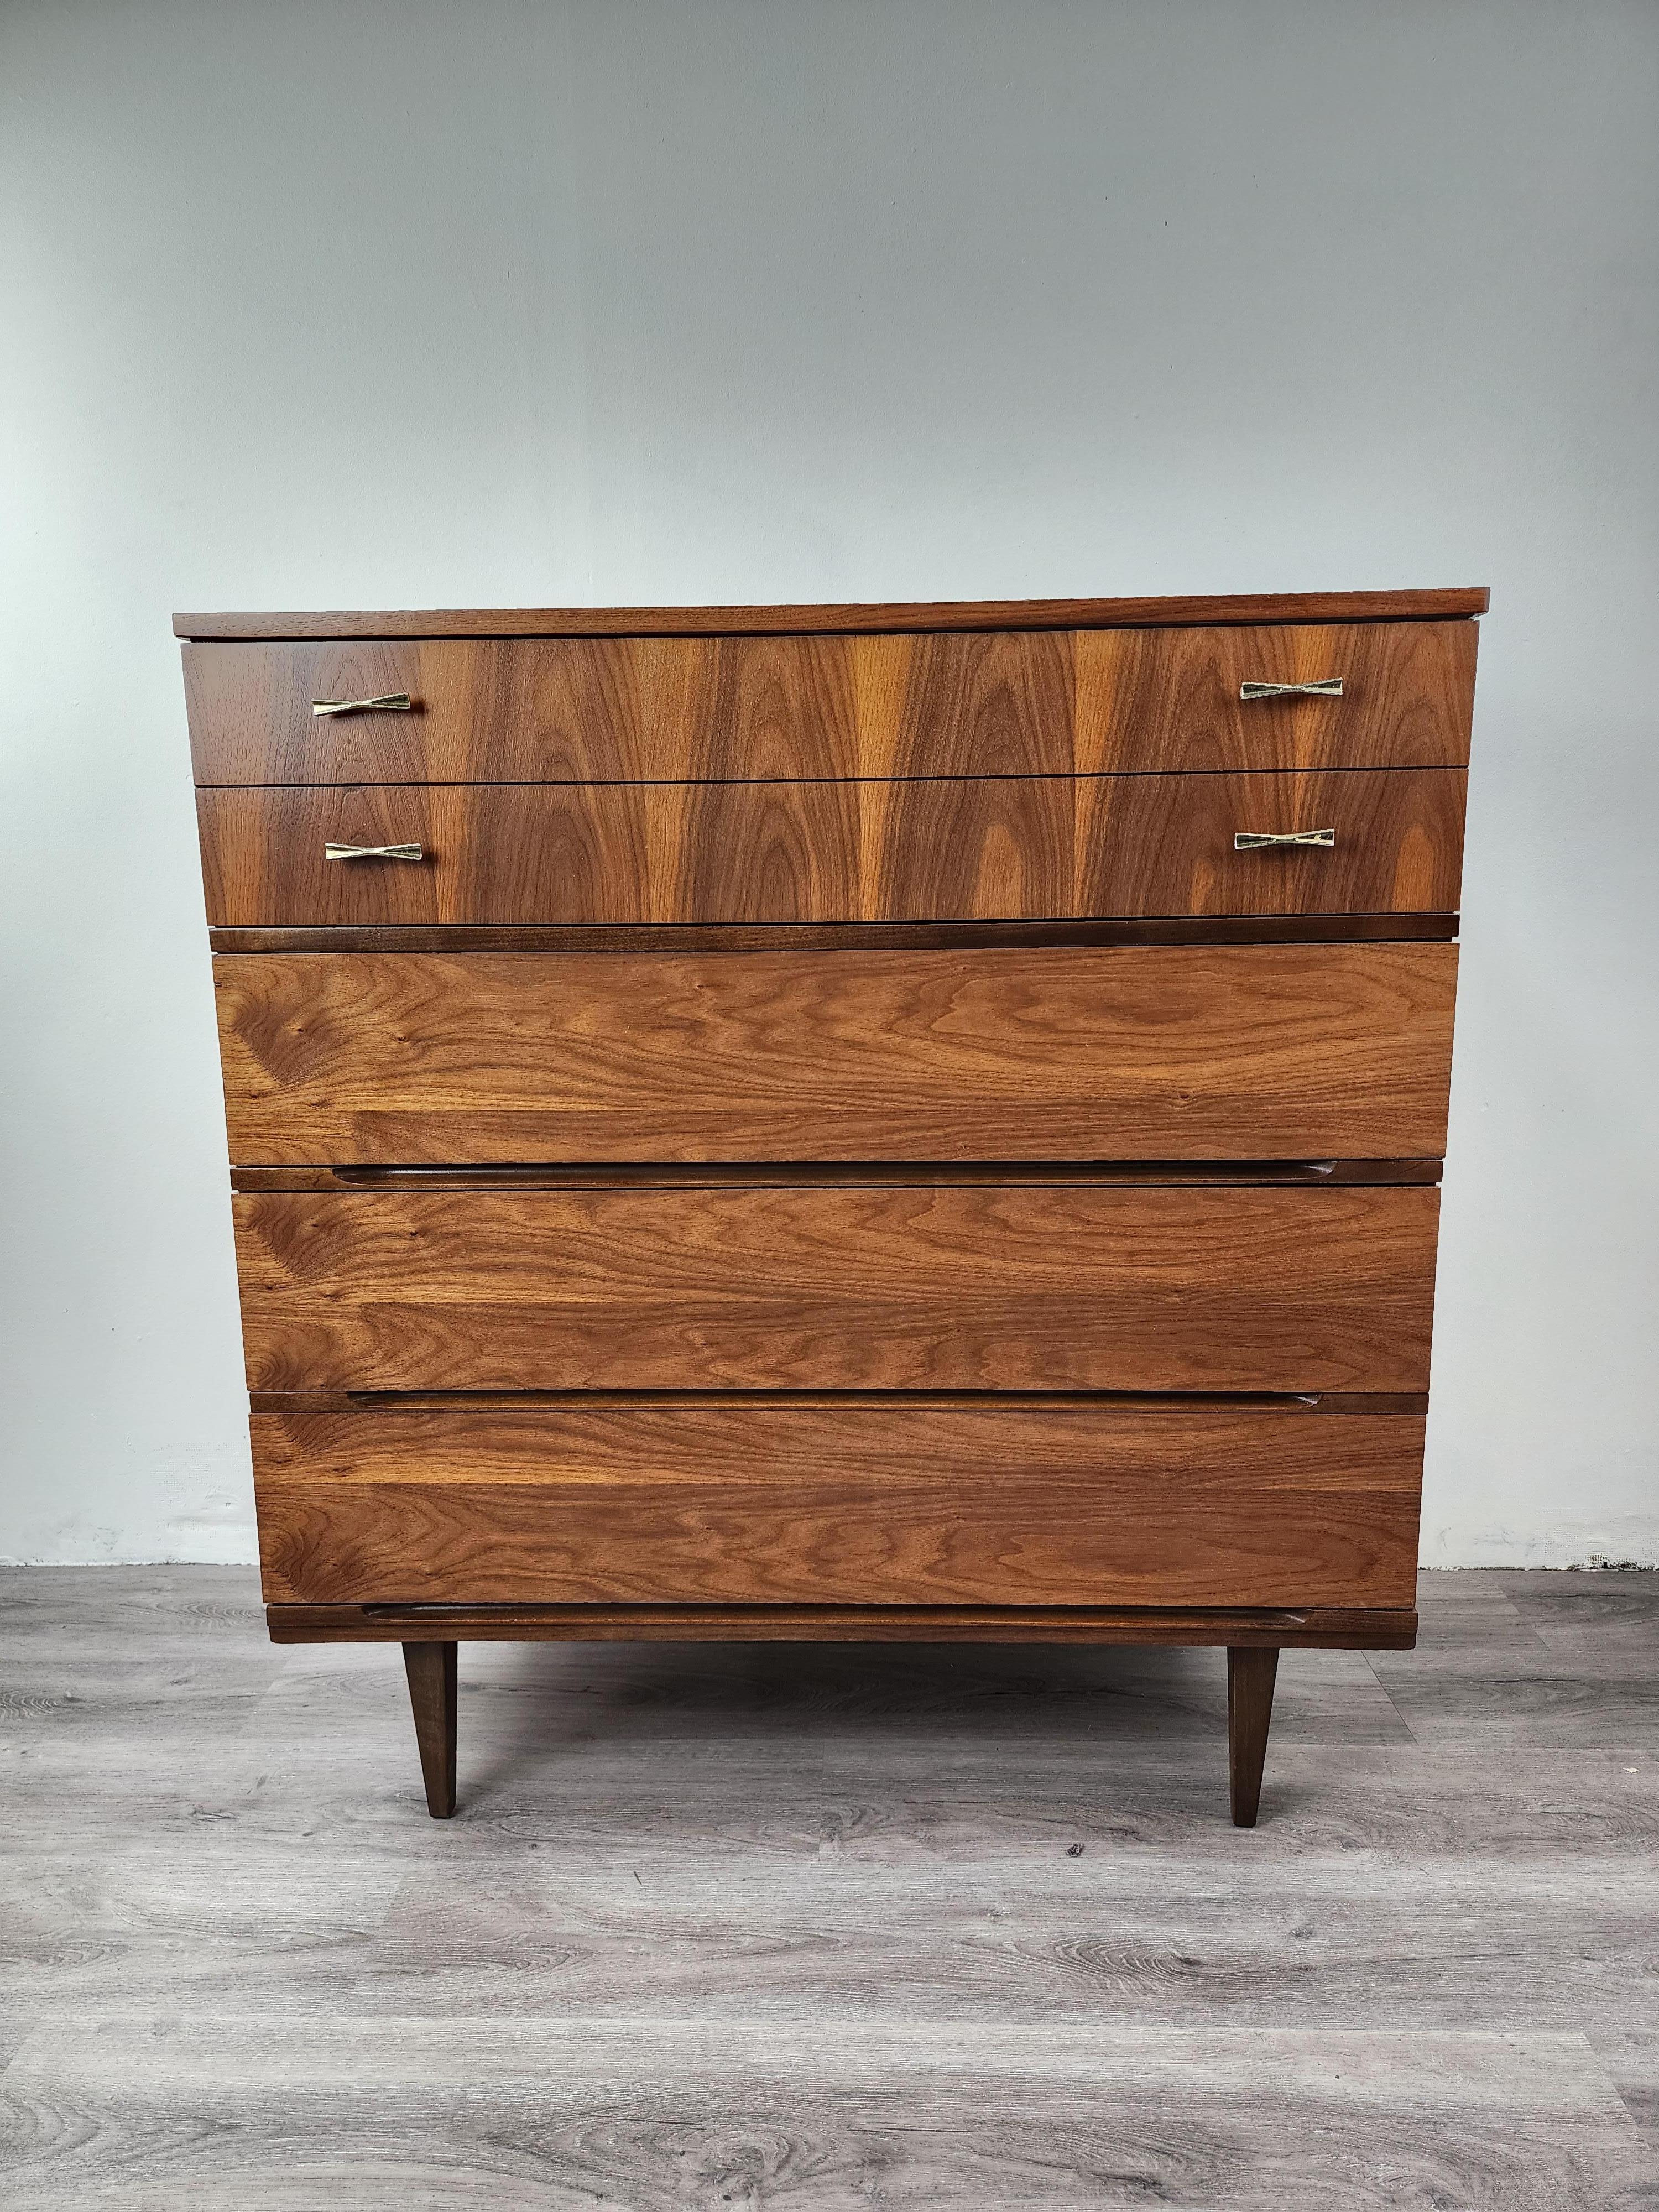 This walnut task chest was created by Harmony House in the 1960s. Purchased from the family of the original owner, this piece had been professionally refinished so it looks as good as the day it was first purchased. The grain on the vintage walnut